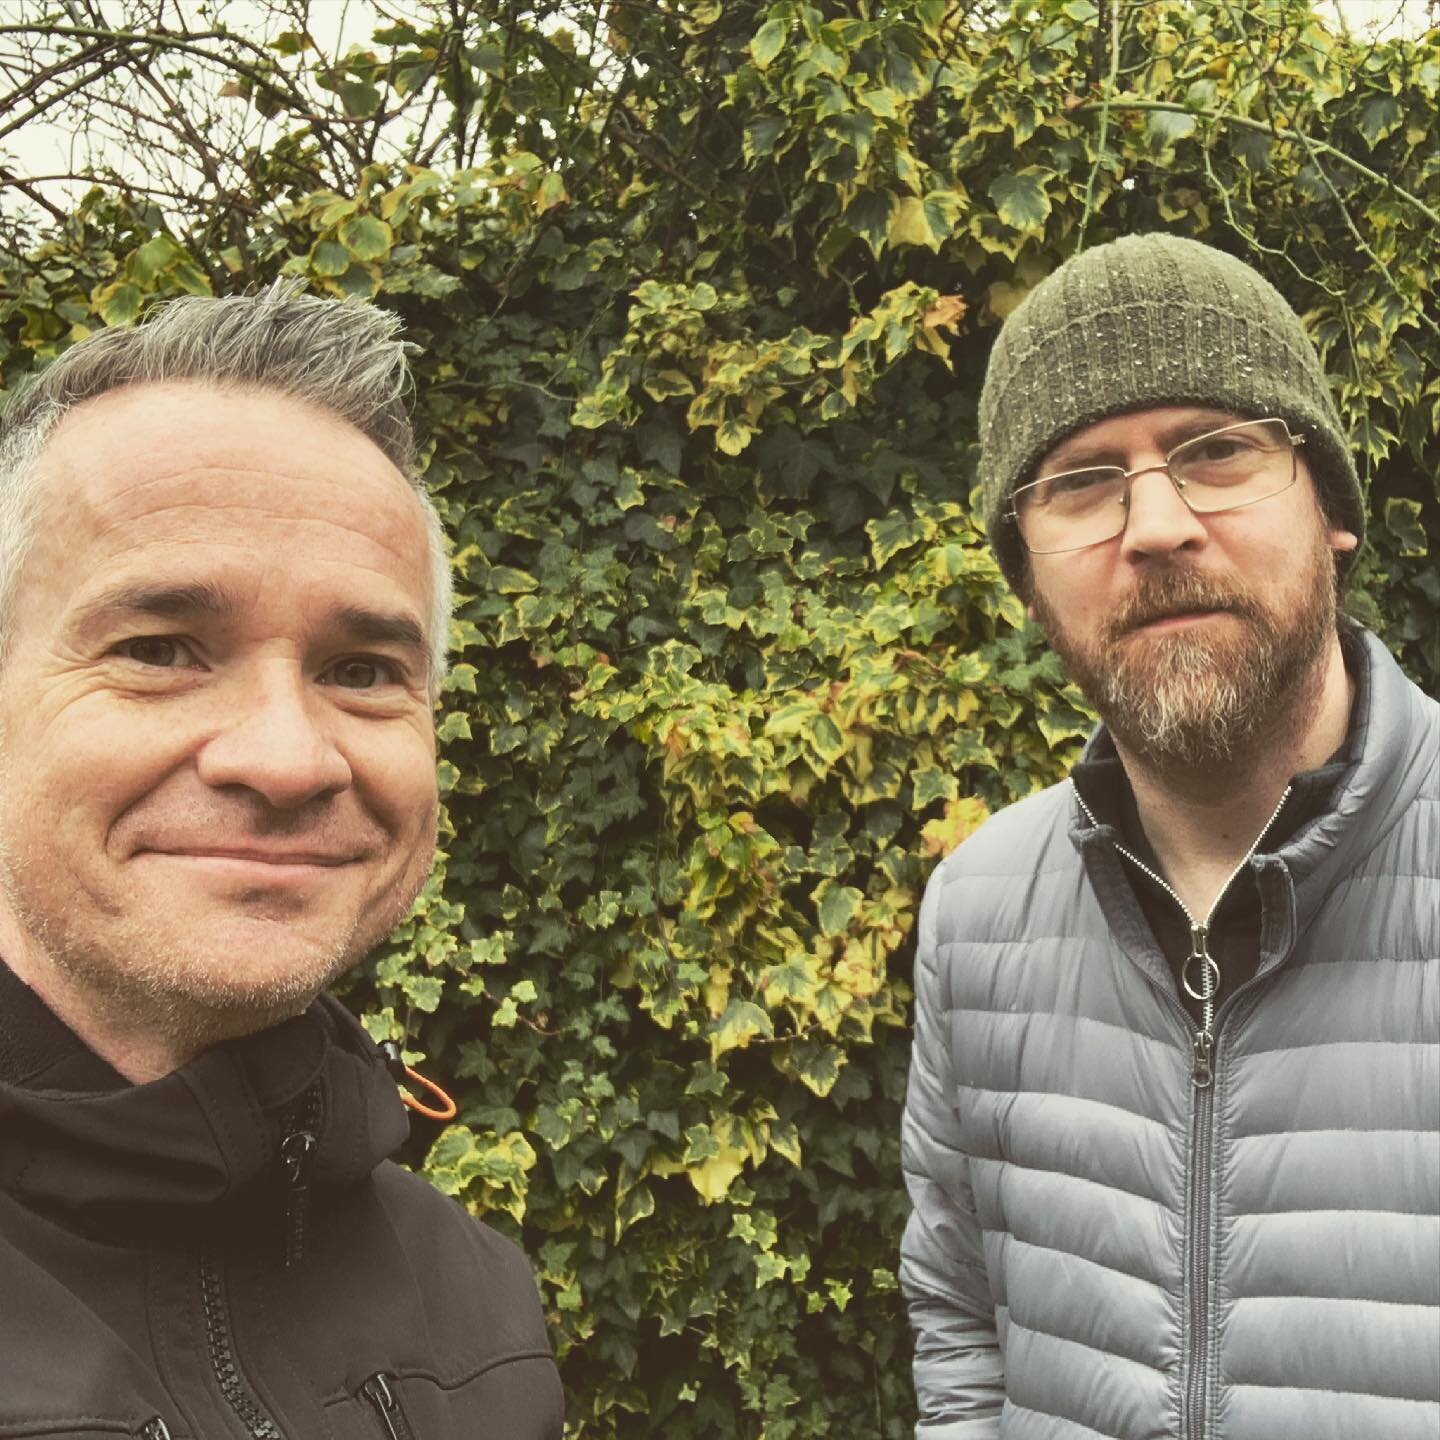 First episode is out on Monday morning - an introductory chat with Chris and Alex talking about their early musical memories, first gig, favourite venues and plans for upcoming episodes...